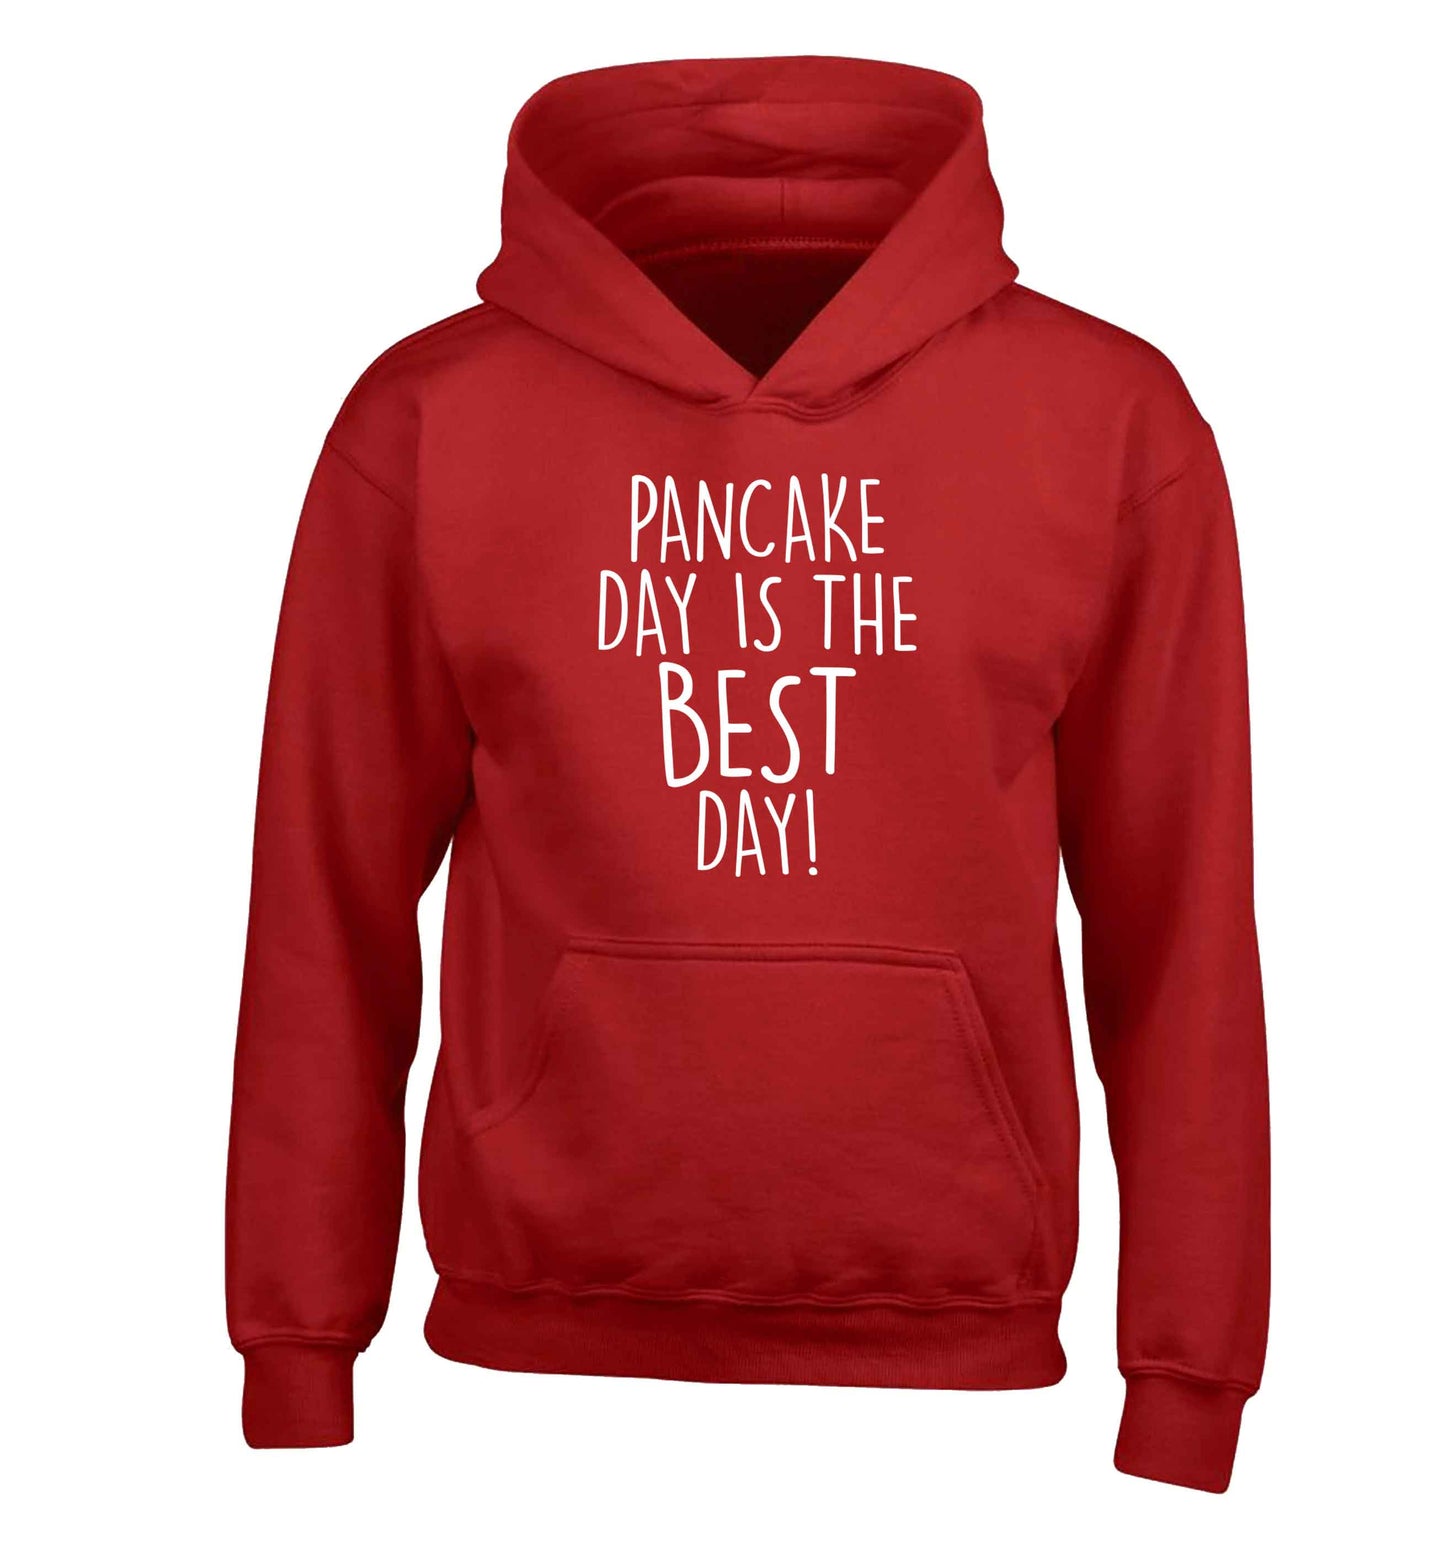 Pancake day is the best day children's red hoodie 12-13 Years